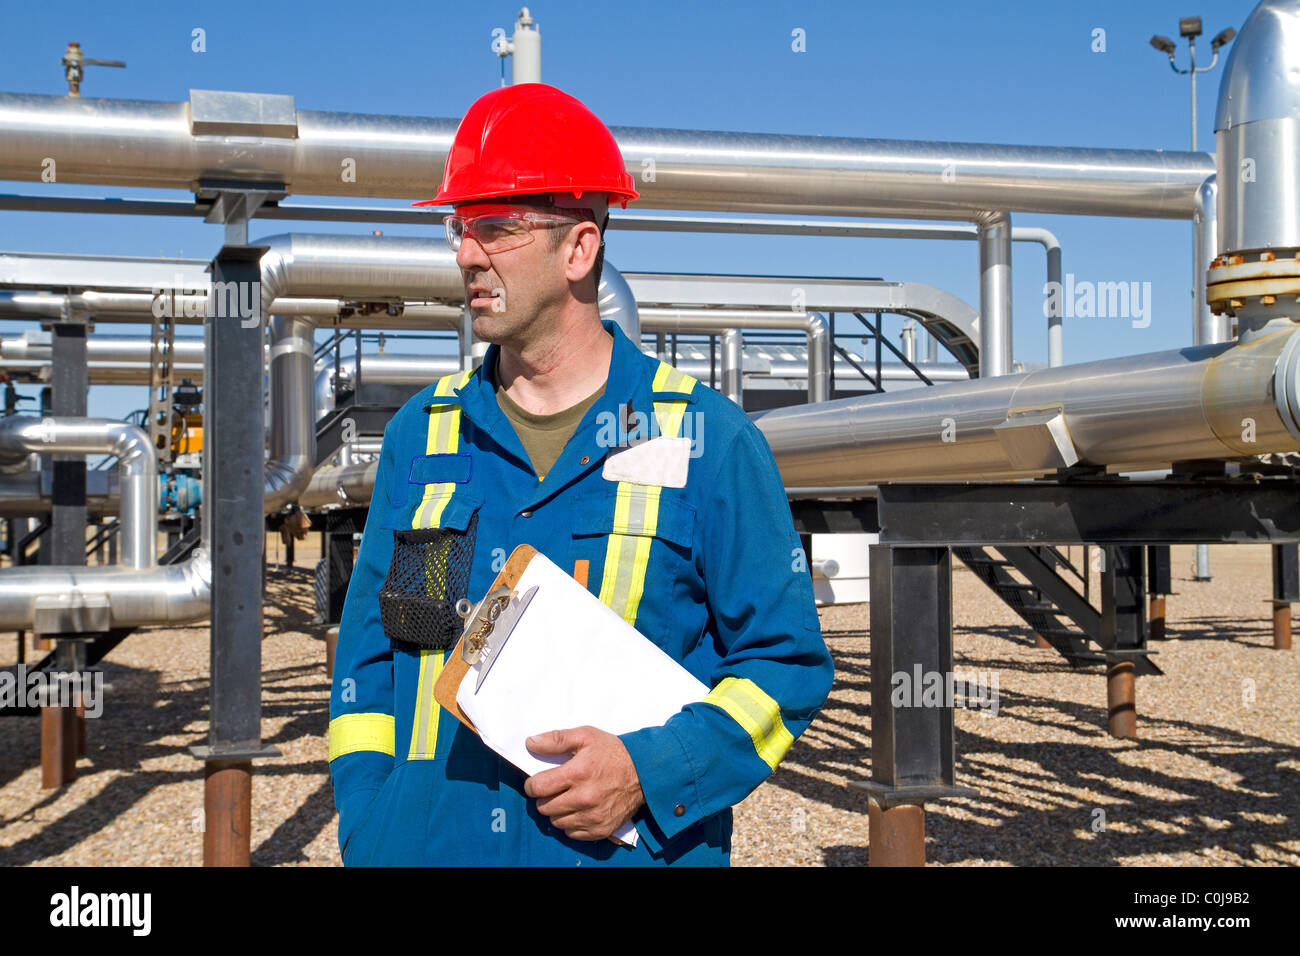 A man in full safety gear inspects and assess an upstream natural gas compressor site in alberta canada Stock Photo